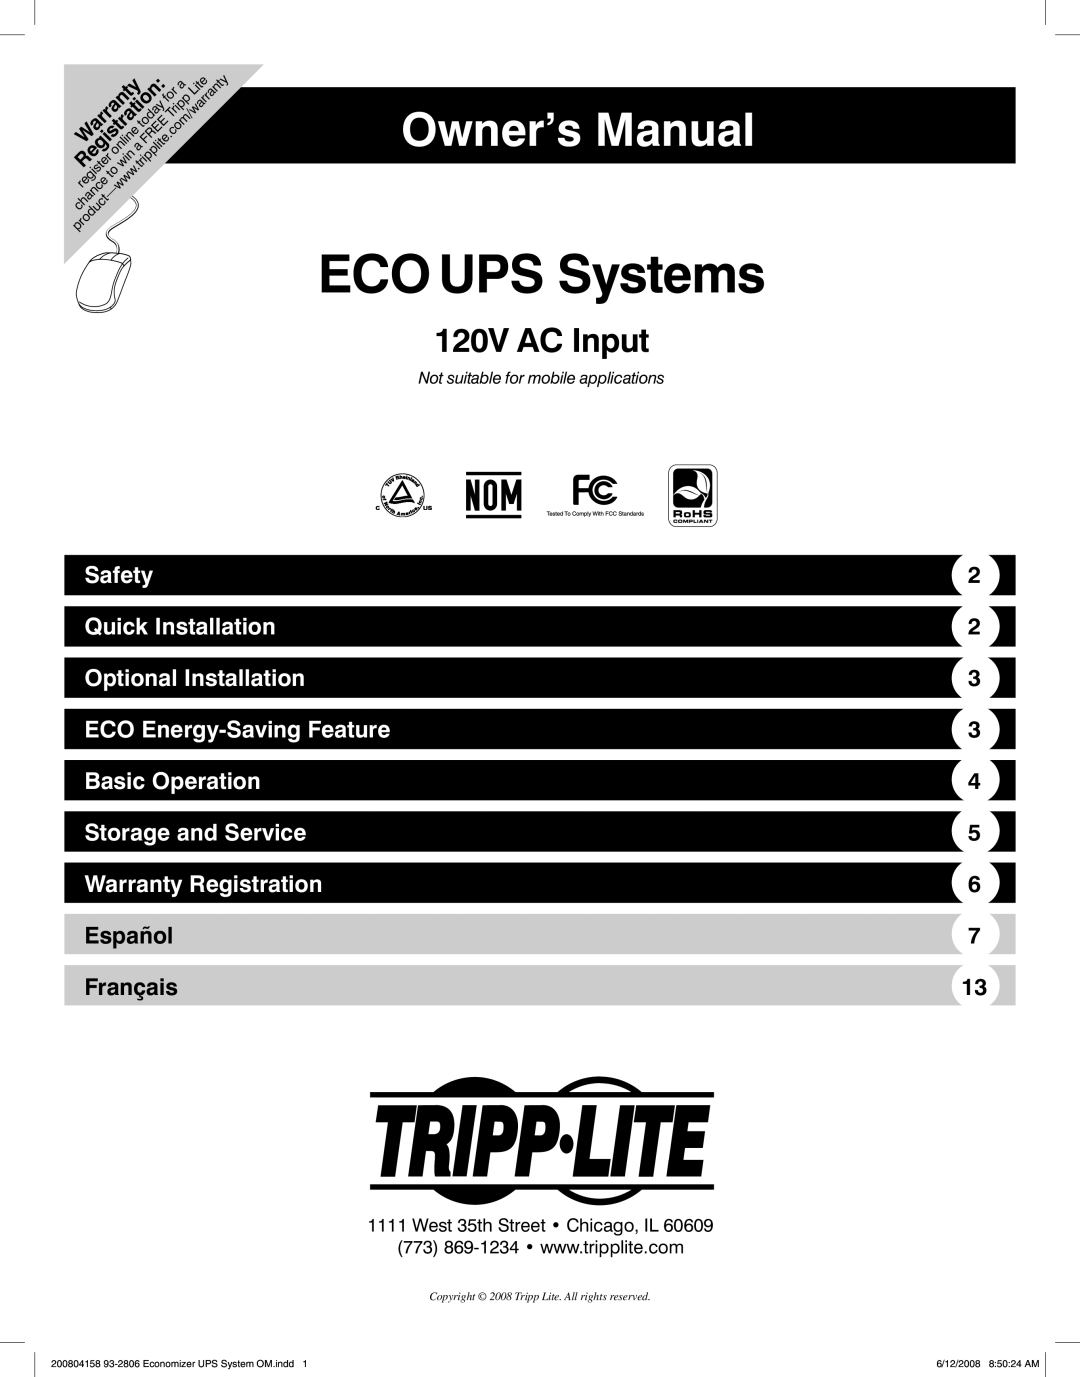 Tripp Lite owner manual ECO UPS Systems, Owner’s Manual, 120V AC Input, Safety, Quick Installation, Basic Operation 